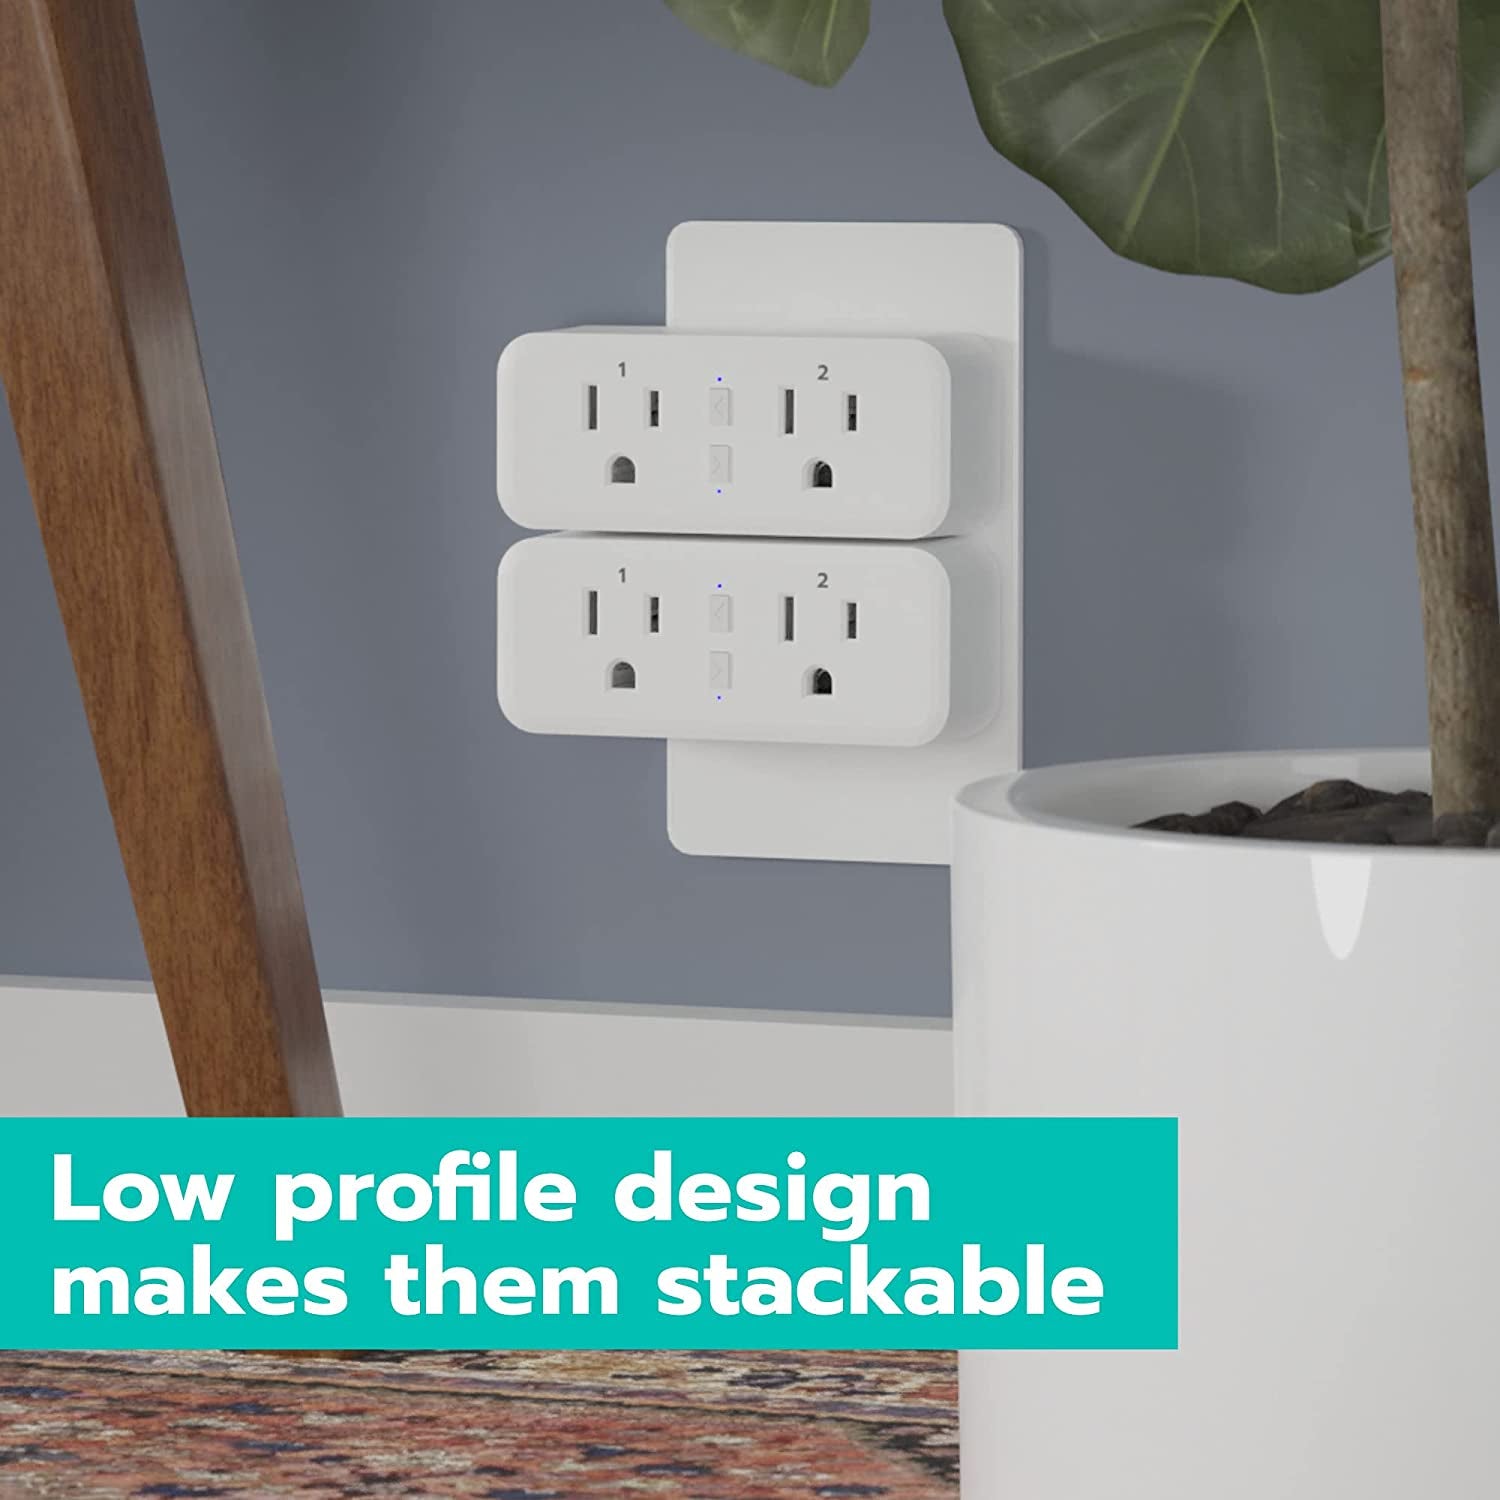 Smart Plug Duo, 2-Outlet Wi-Fi Smart Plug, 2-Pack, Multi Plug Adapter, Independently Controlled Smart Outlets, Works with Alexa & Google Assistant, No Hub Required